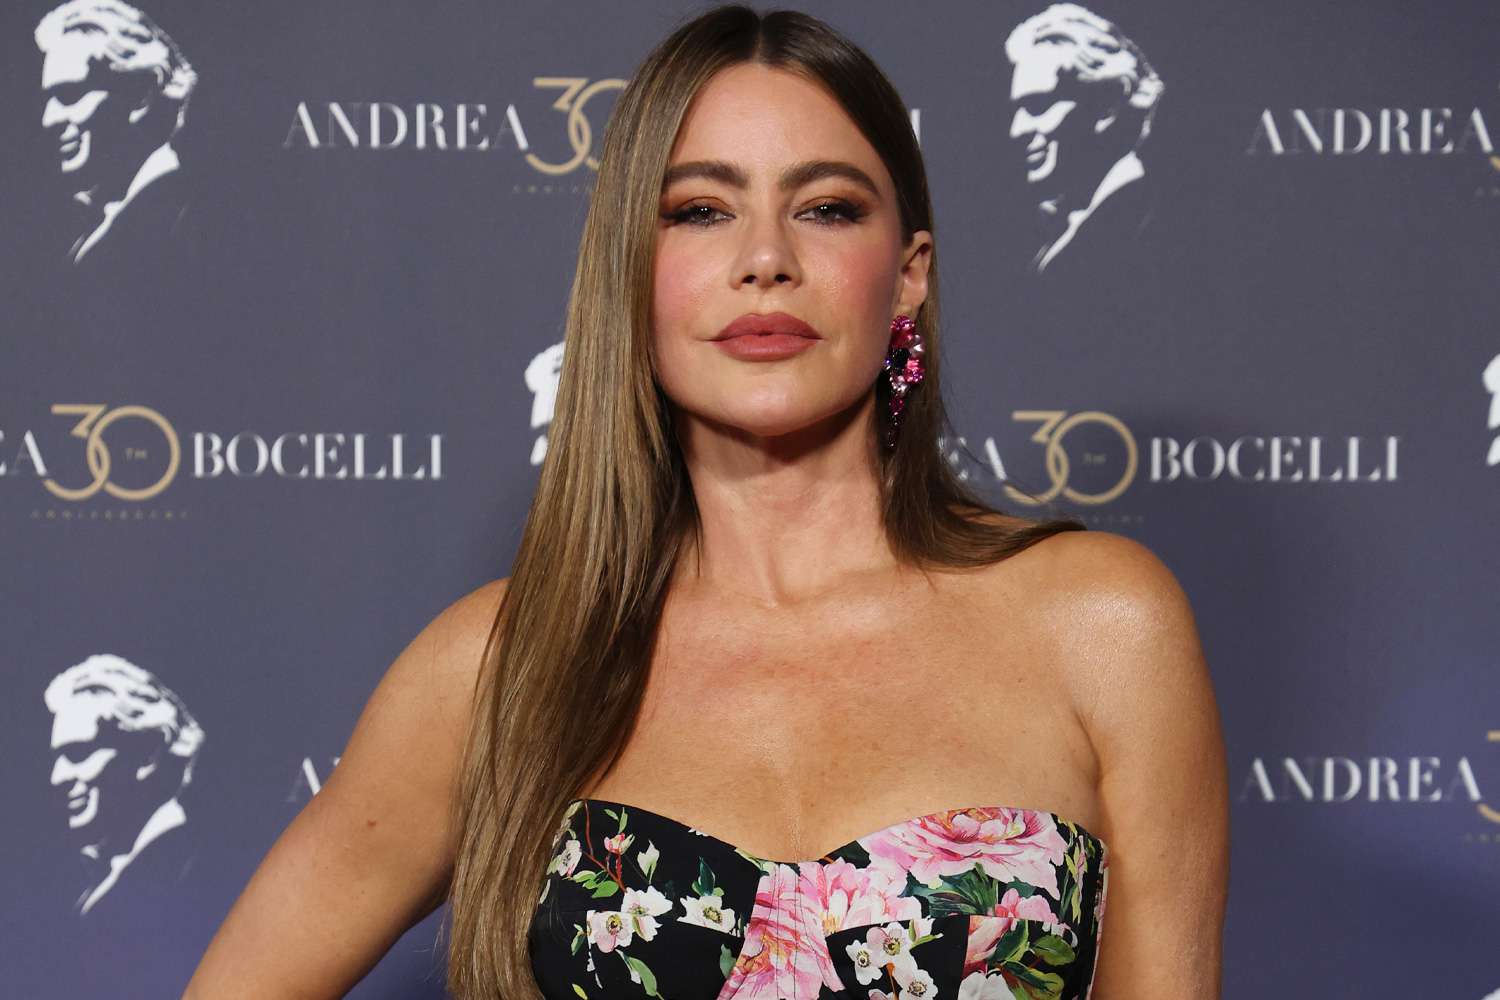 Sofía Vergara Flourishes in Florals at Italy Event, Plus Mick Jagger, Chappell Roan, Aubrey Plaza and More